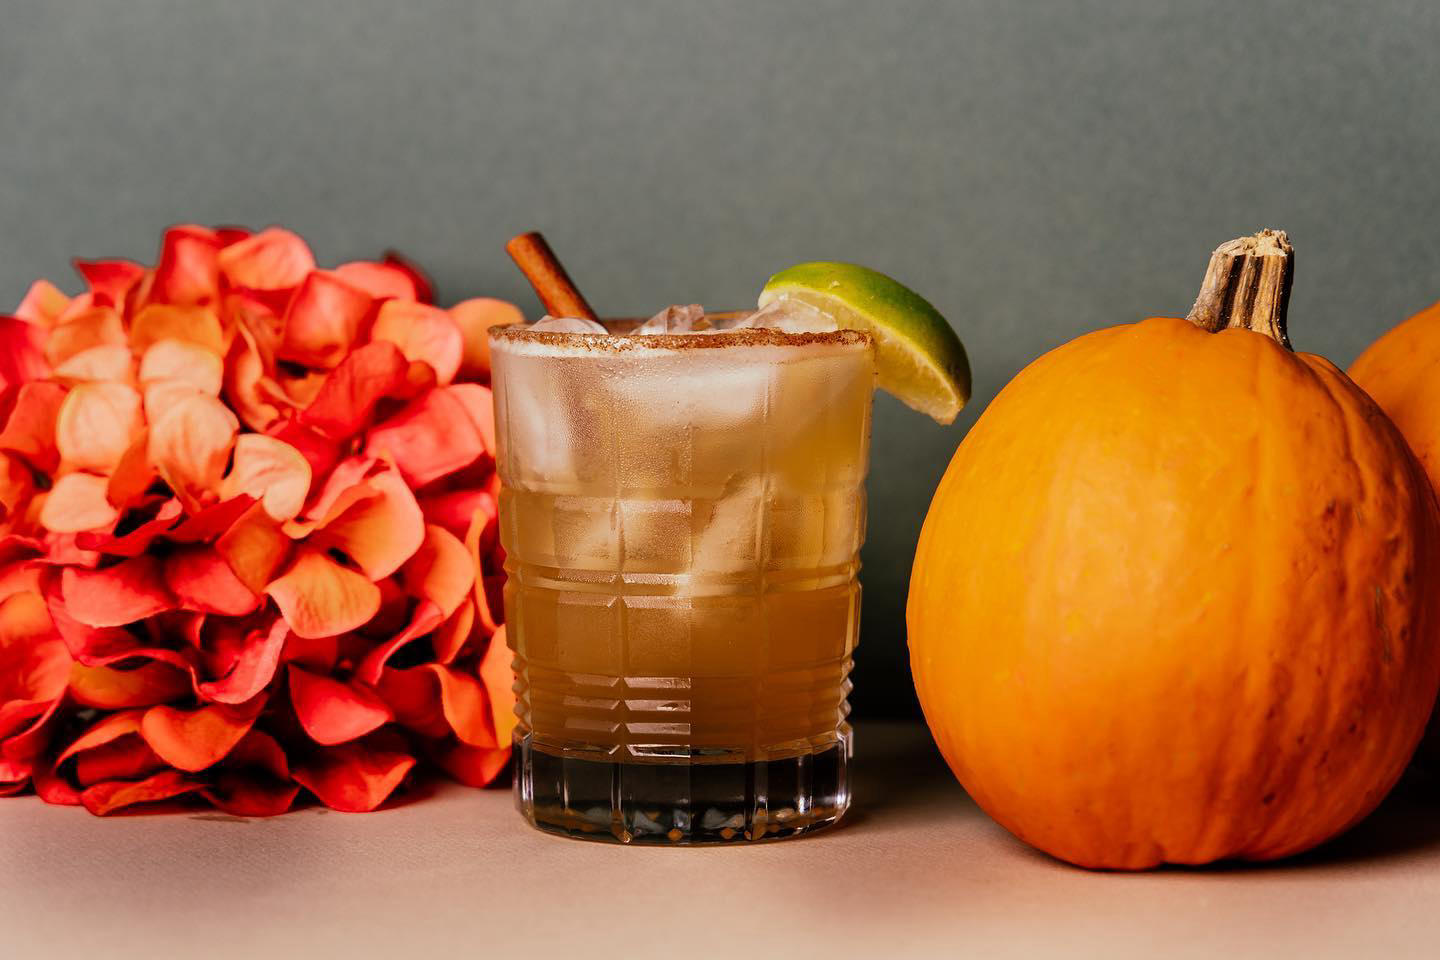 Hilton Cabana Miami Beach - Time to get spooky with this Halloween-inspired margarita